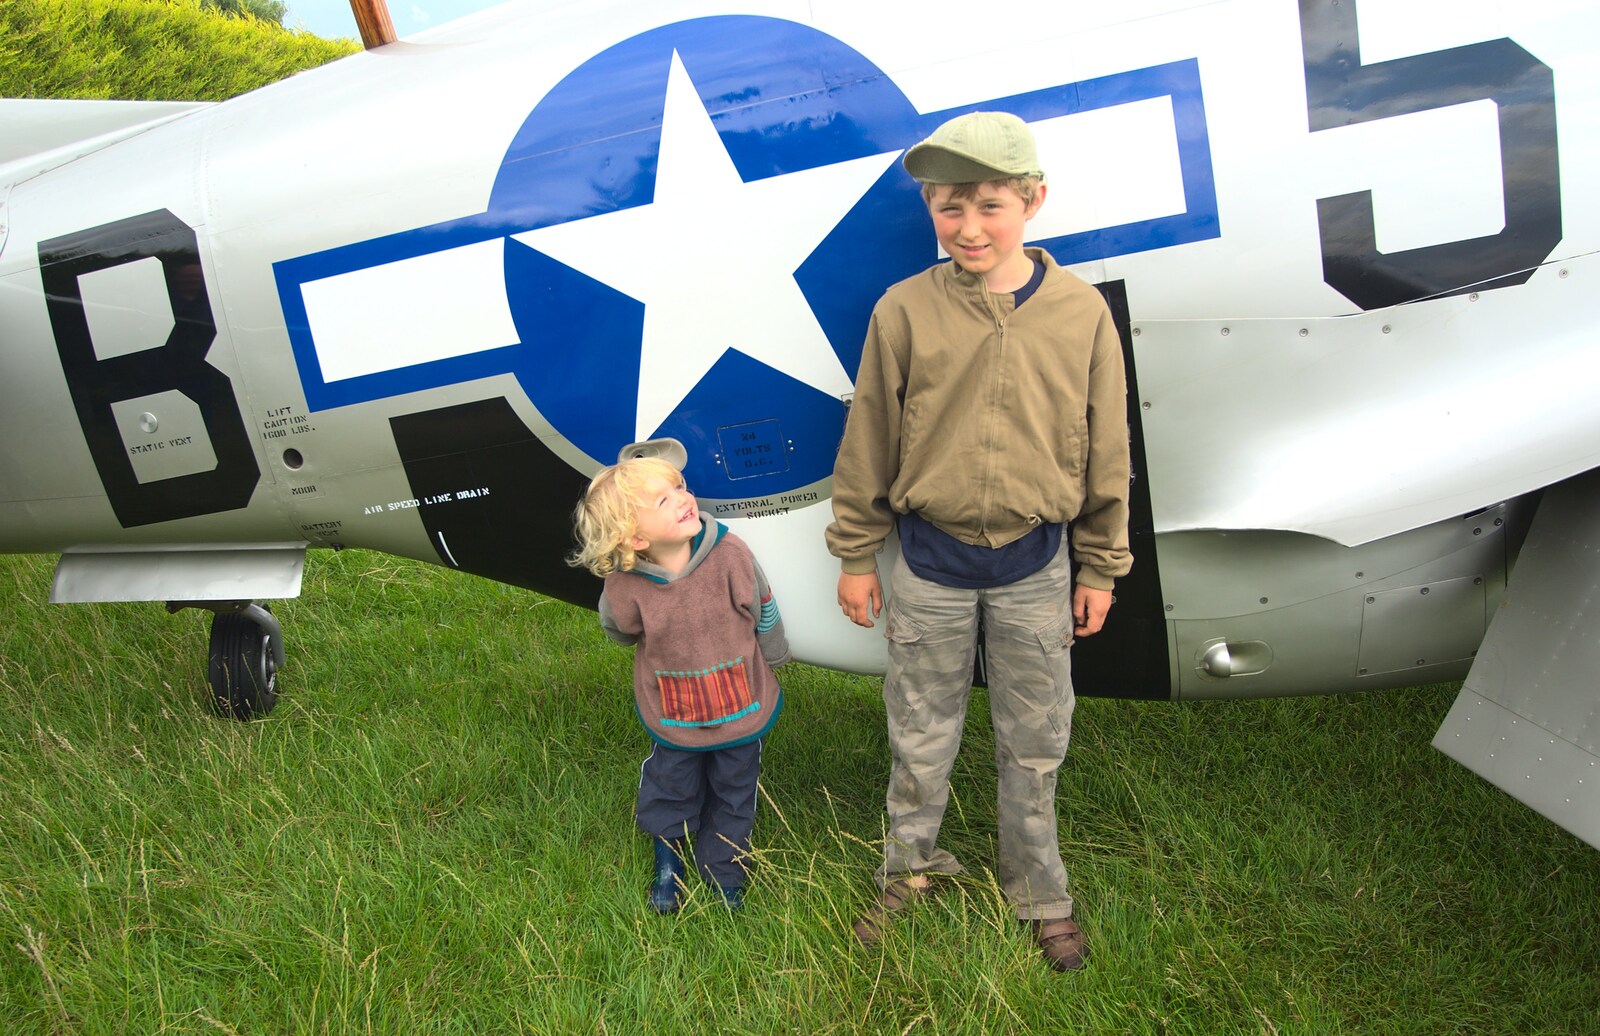 Fred and Max by Marinell from Nosher Flies in a P-51D Mustang, Hardwick Airfield, Norfolk (and the Whole of Suffolk) - 17th July 2011